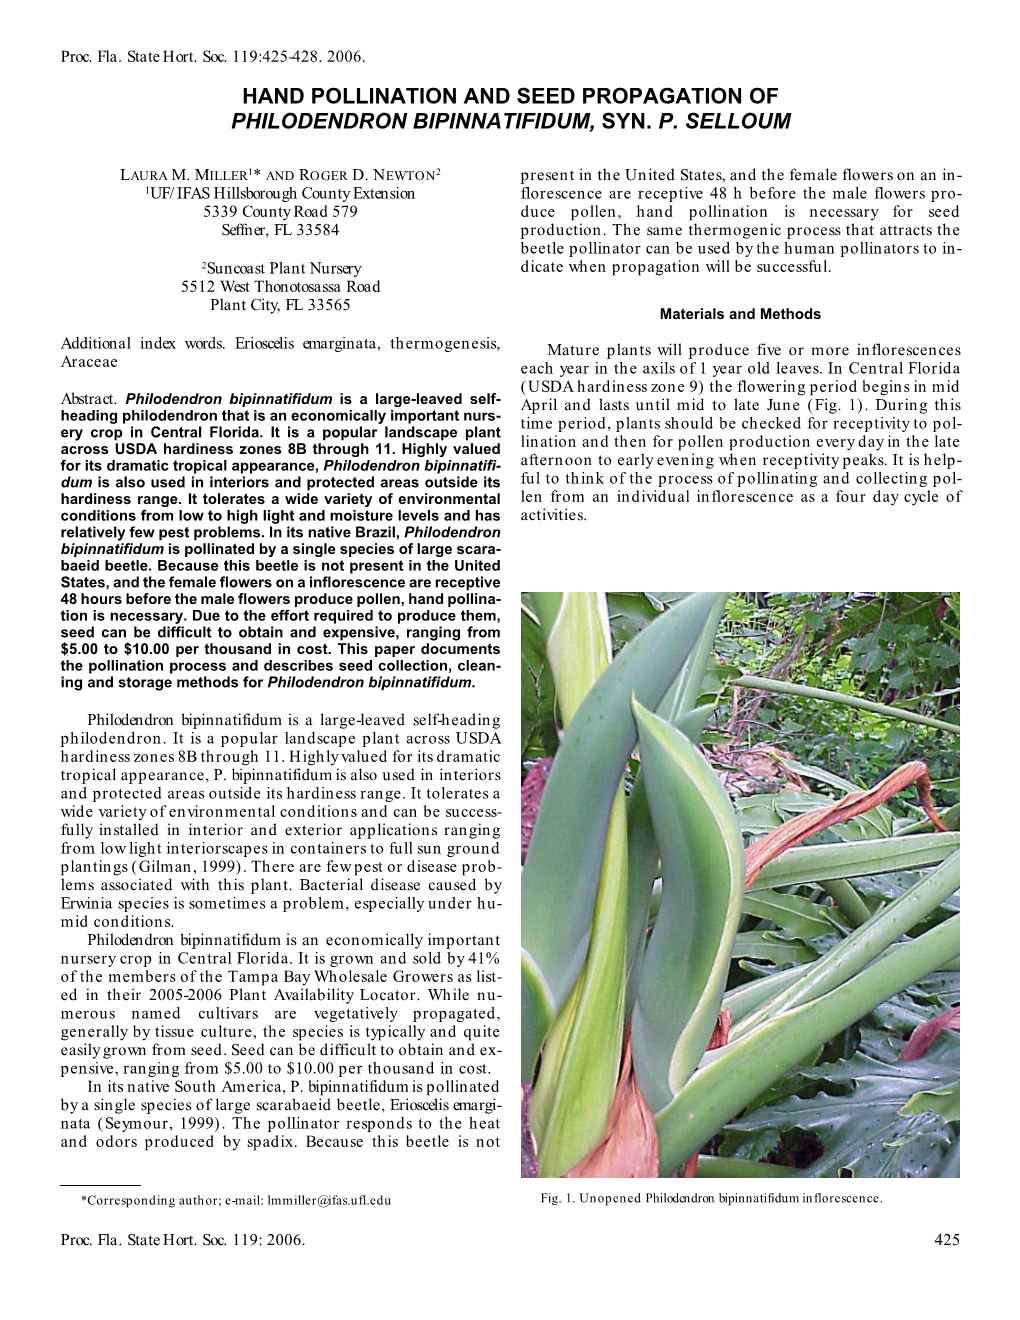 Hand Pollination and Seed Propagation of Philodendron Bipinnatifidum, Syn